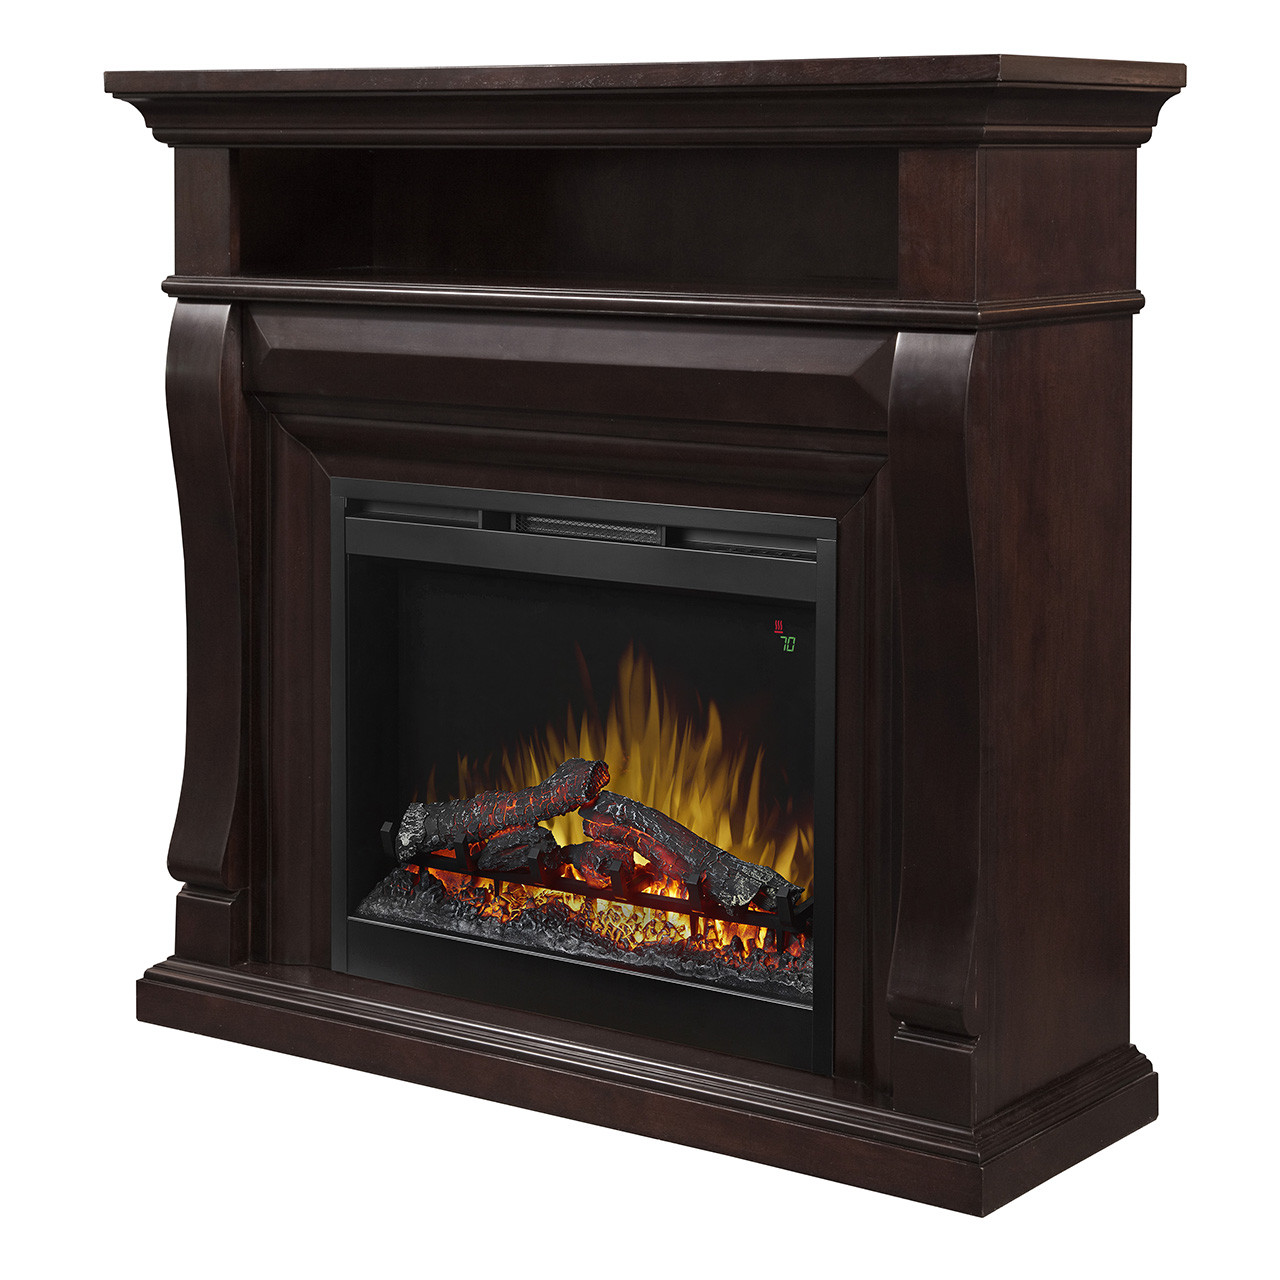 Electric Fireplace And Mantel
 Electric Fireplaces Fireplaces Mantels Dimplex Noah